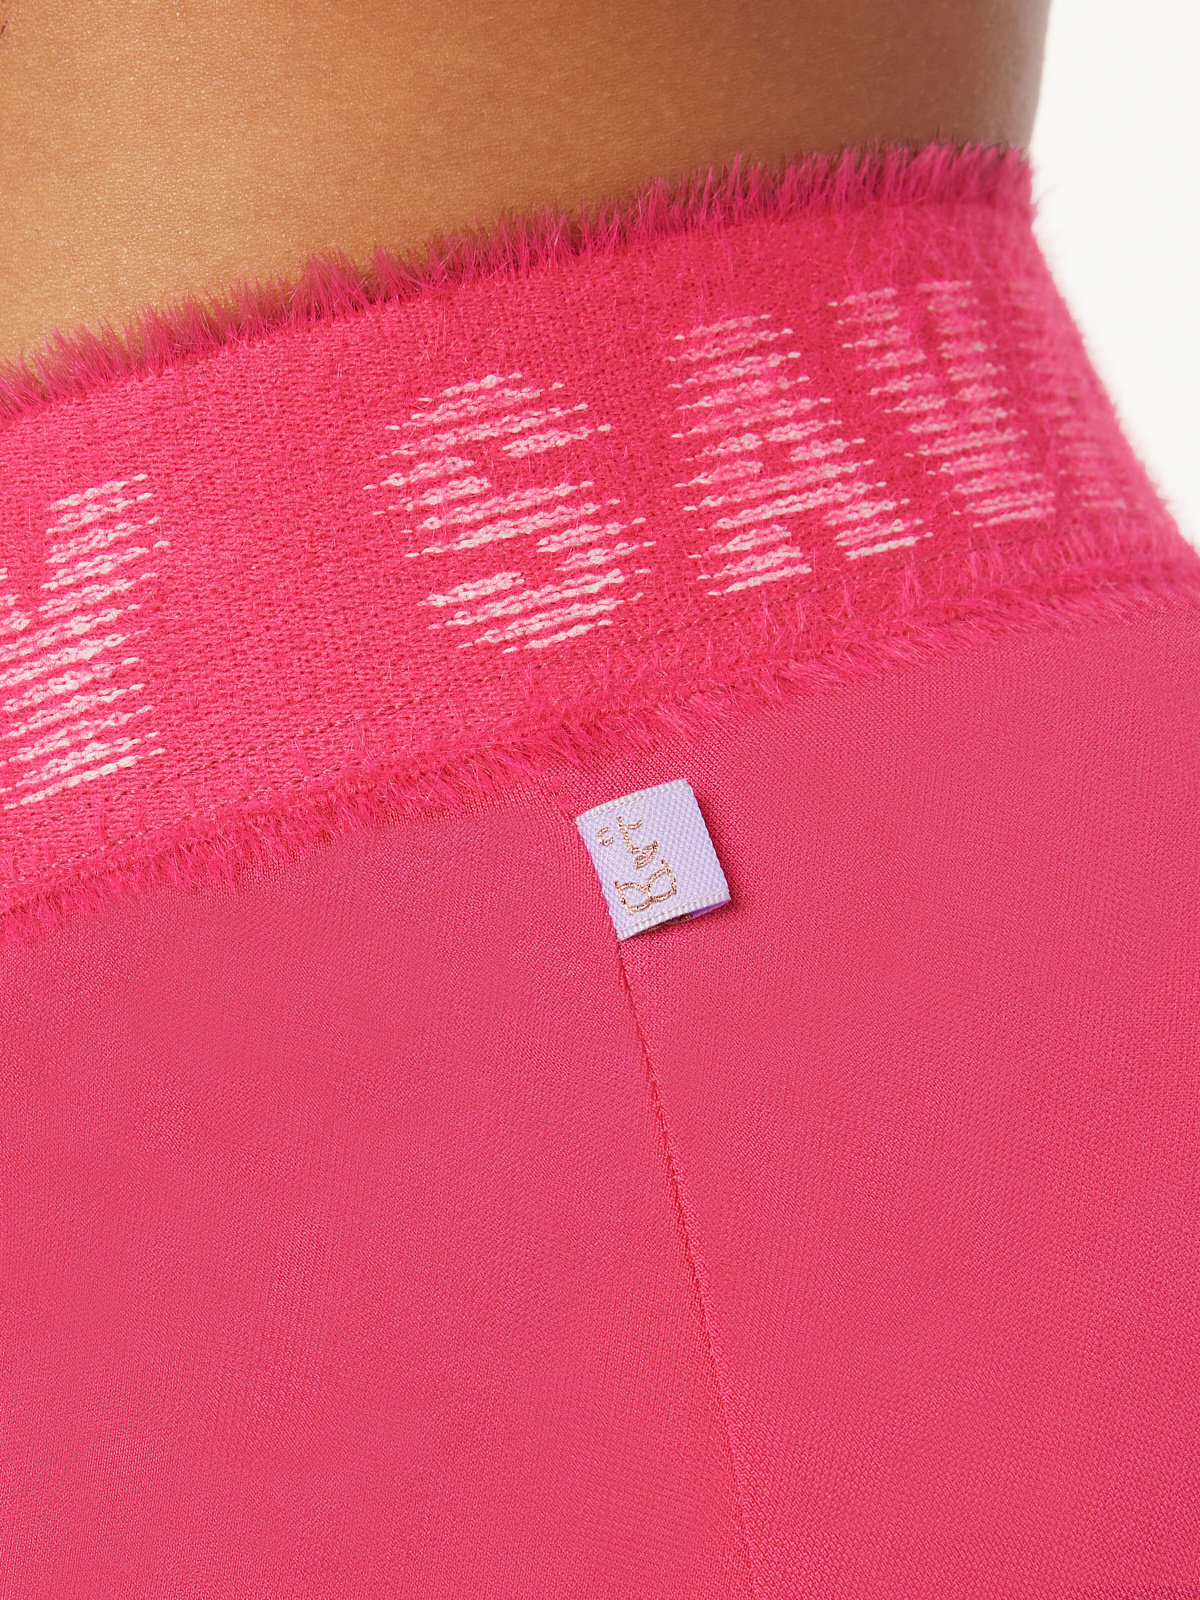 CLF Forever Savage Cheeky Booty Shorts in Pink